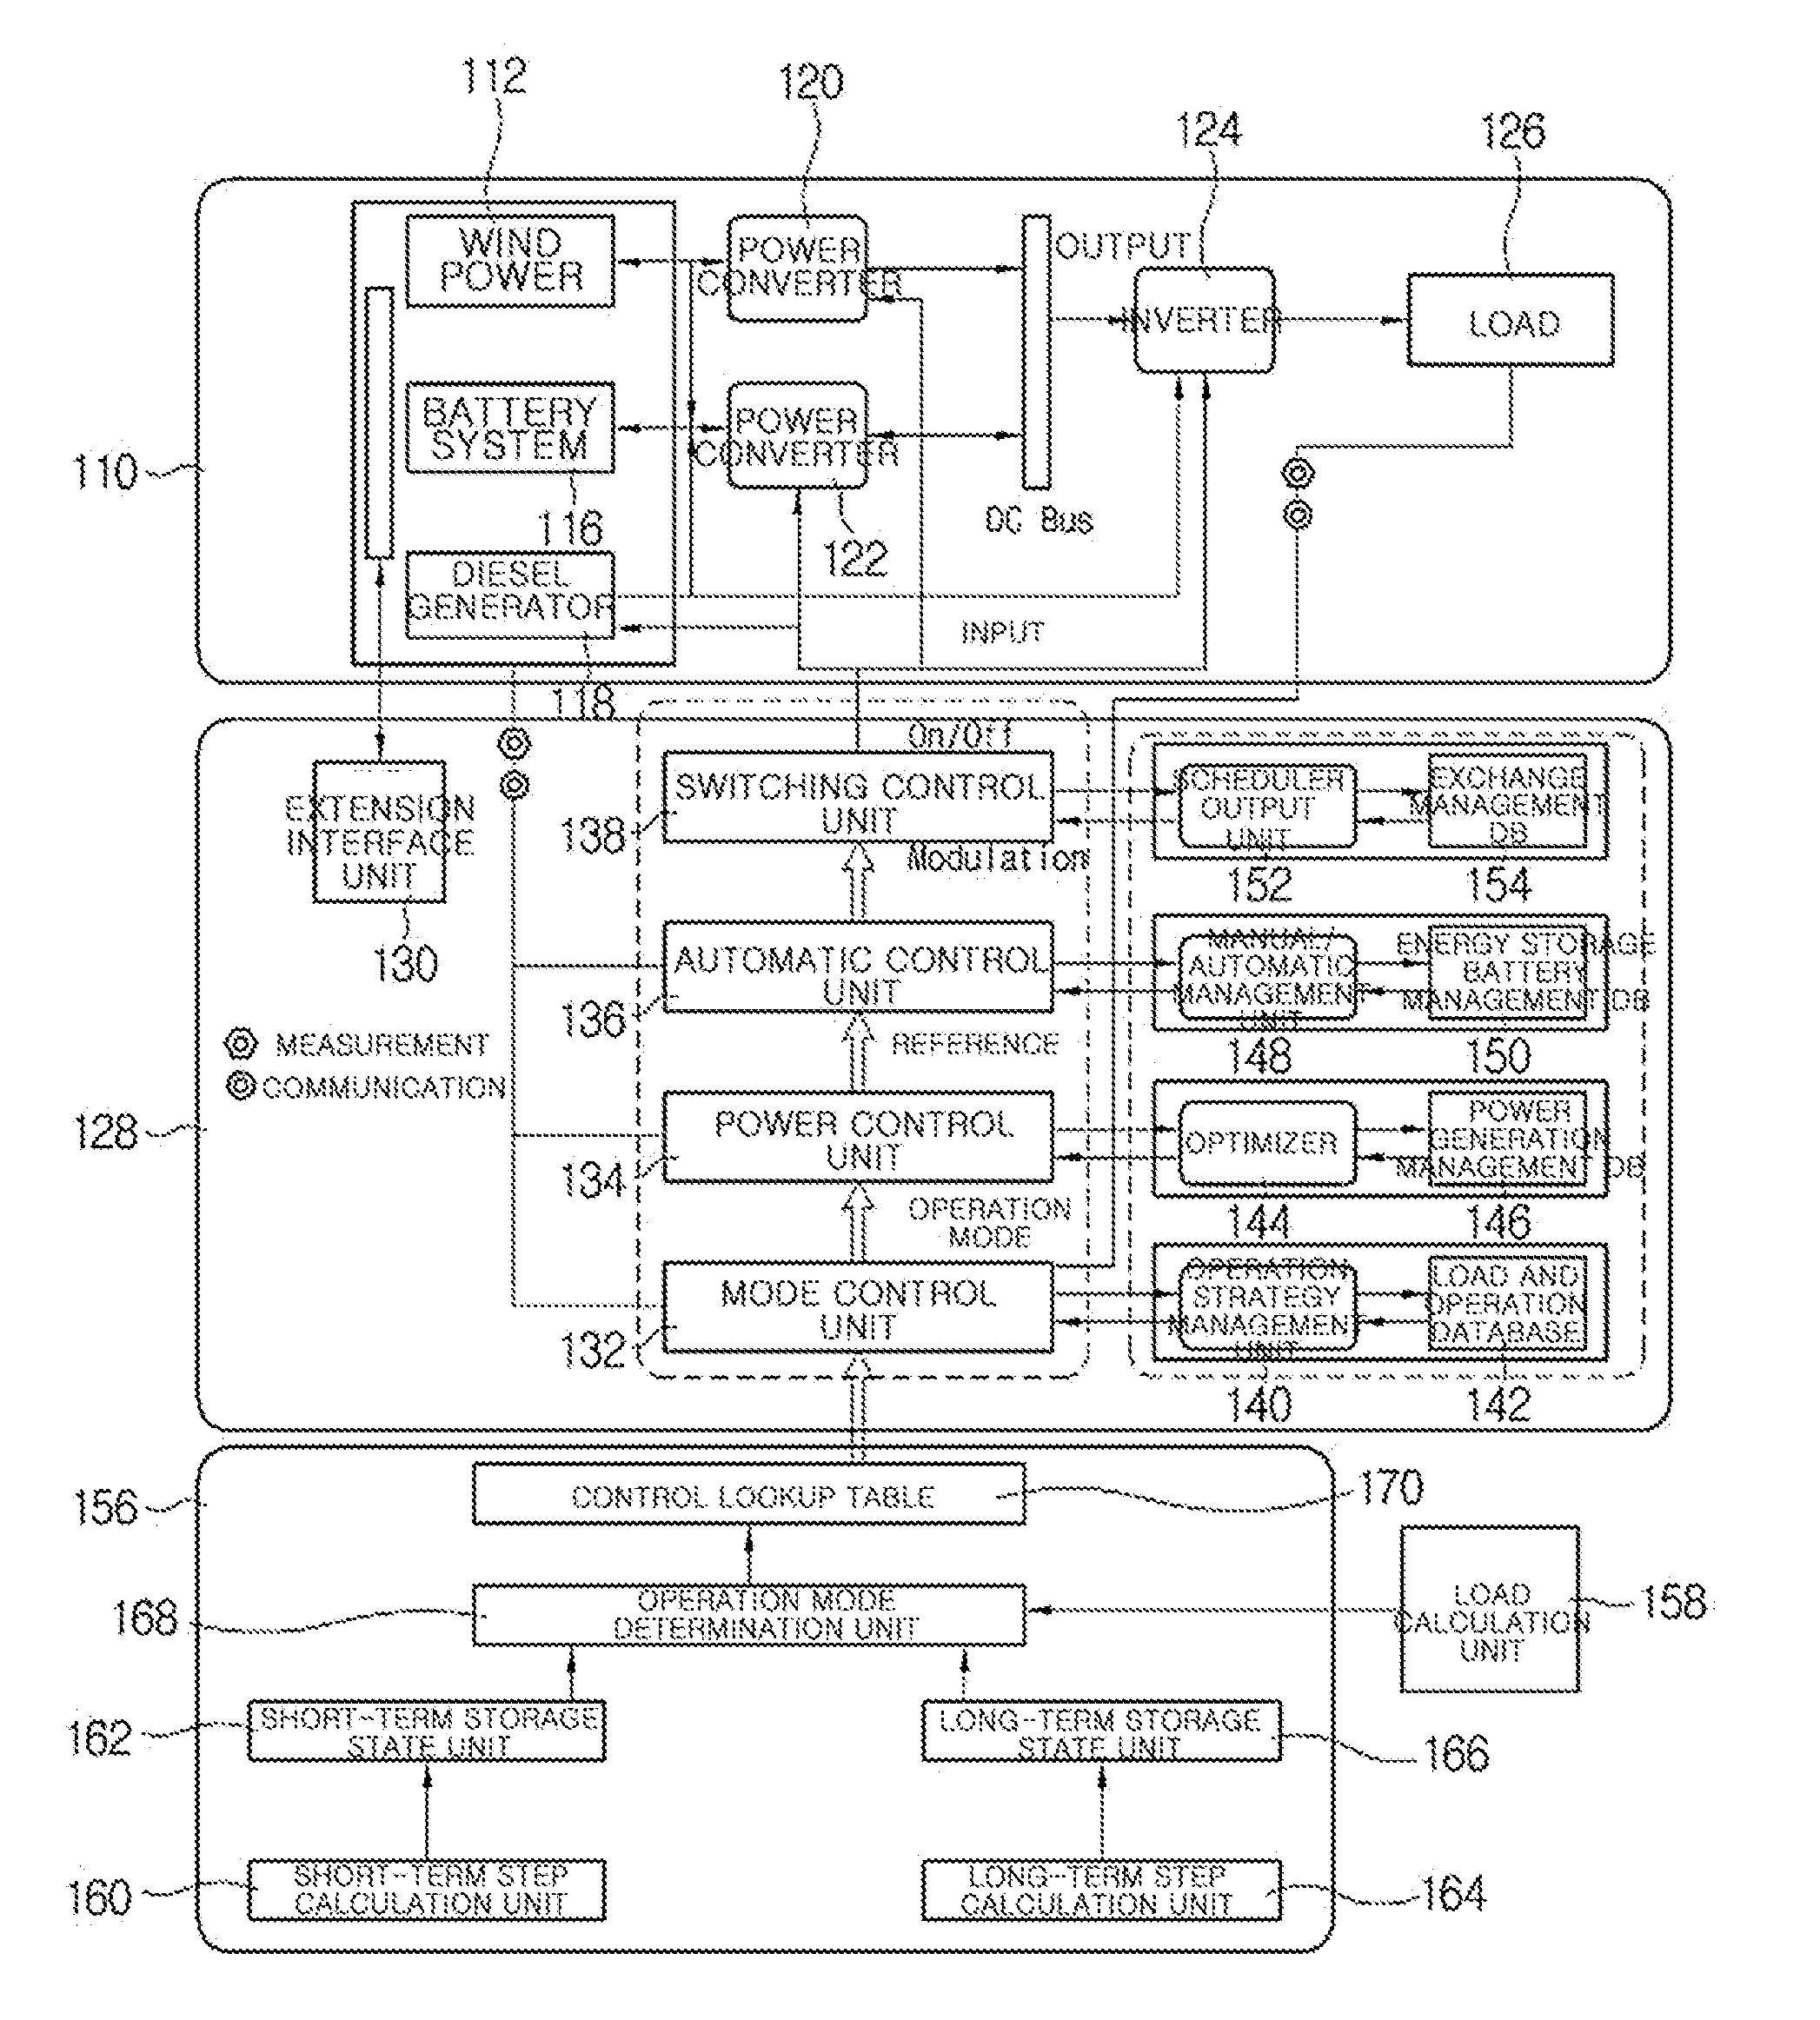 System and method for controlling micro-grid operation